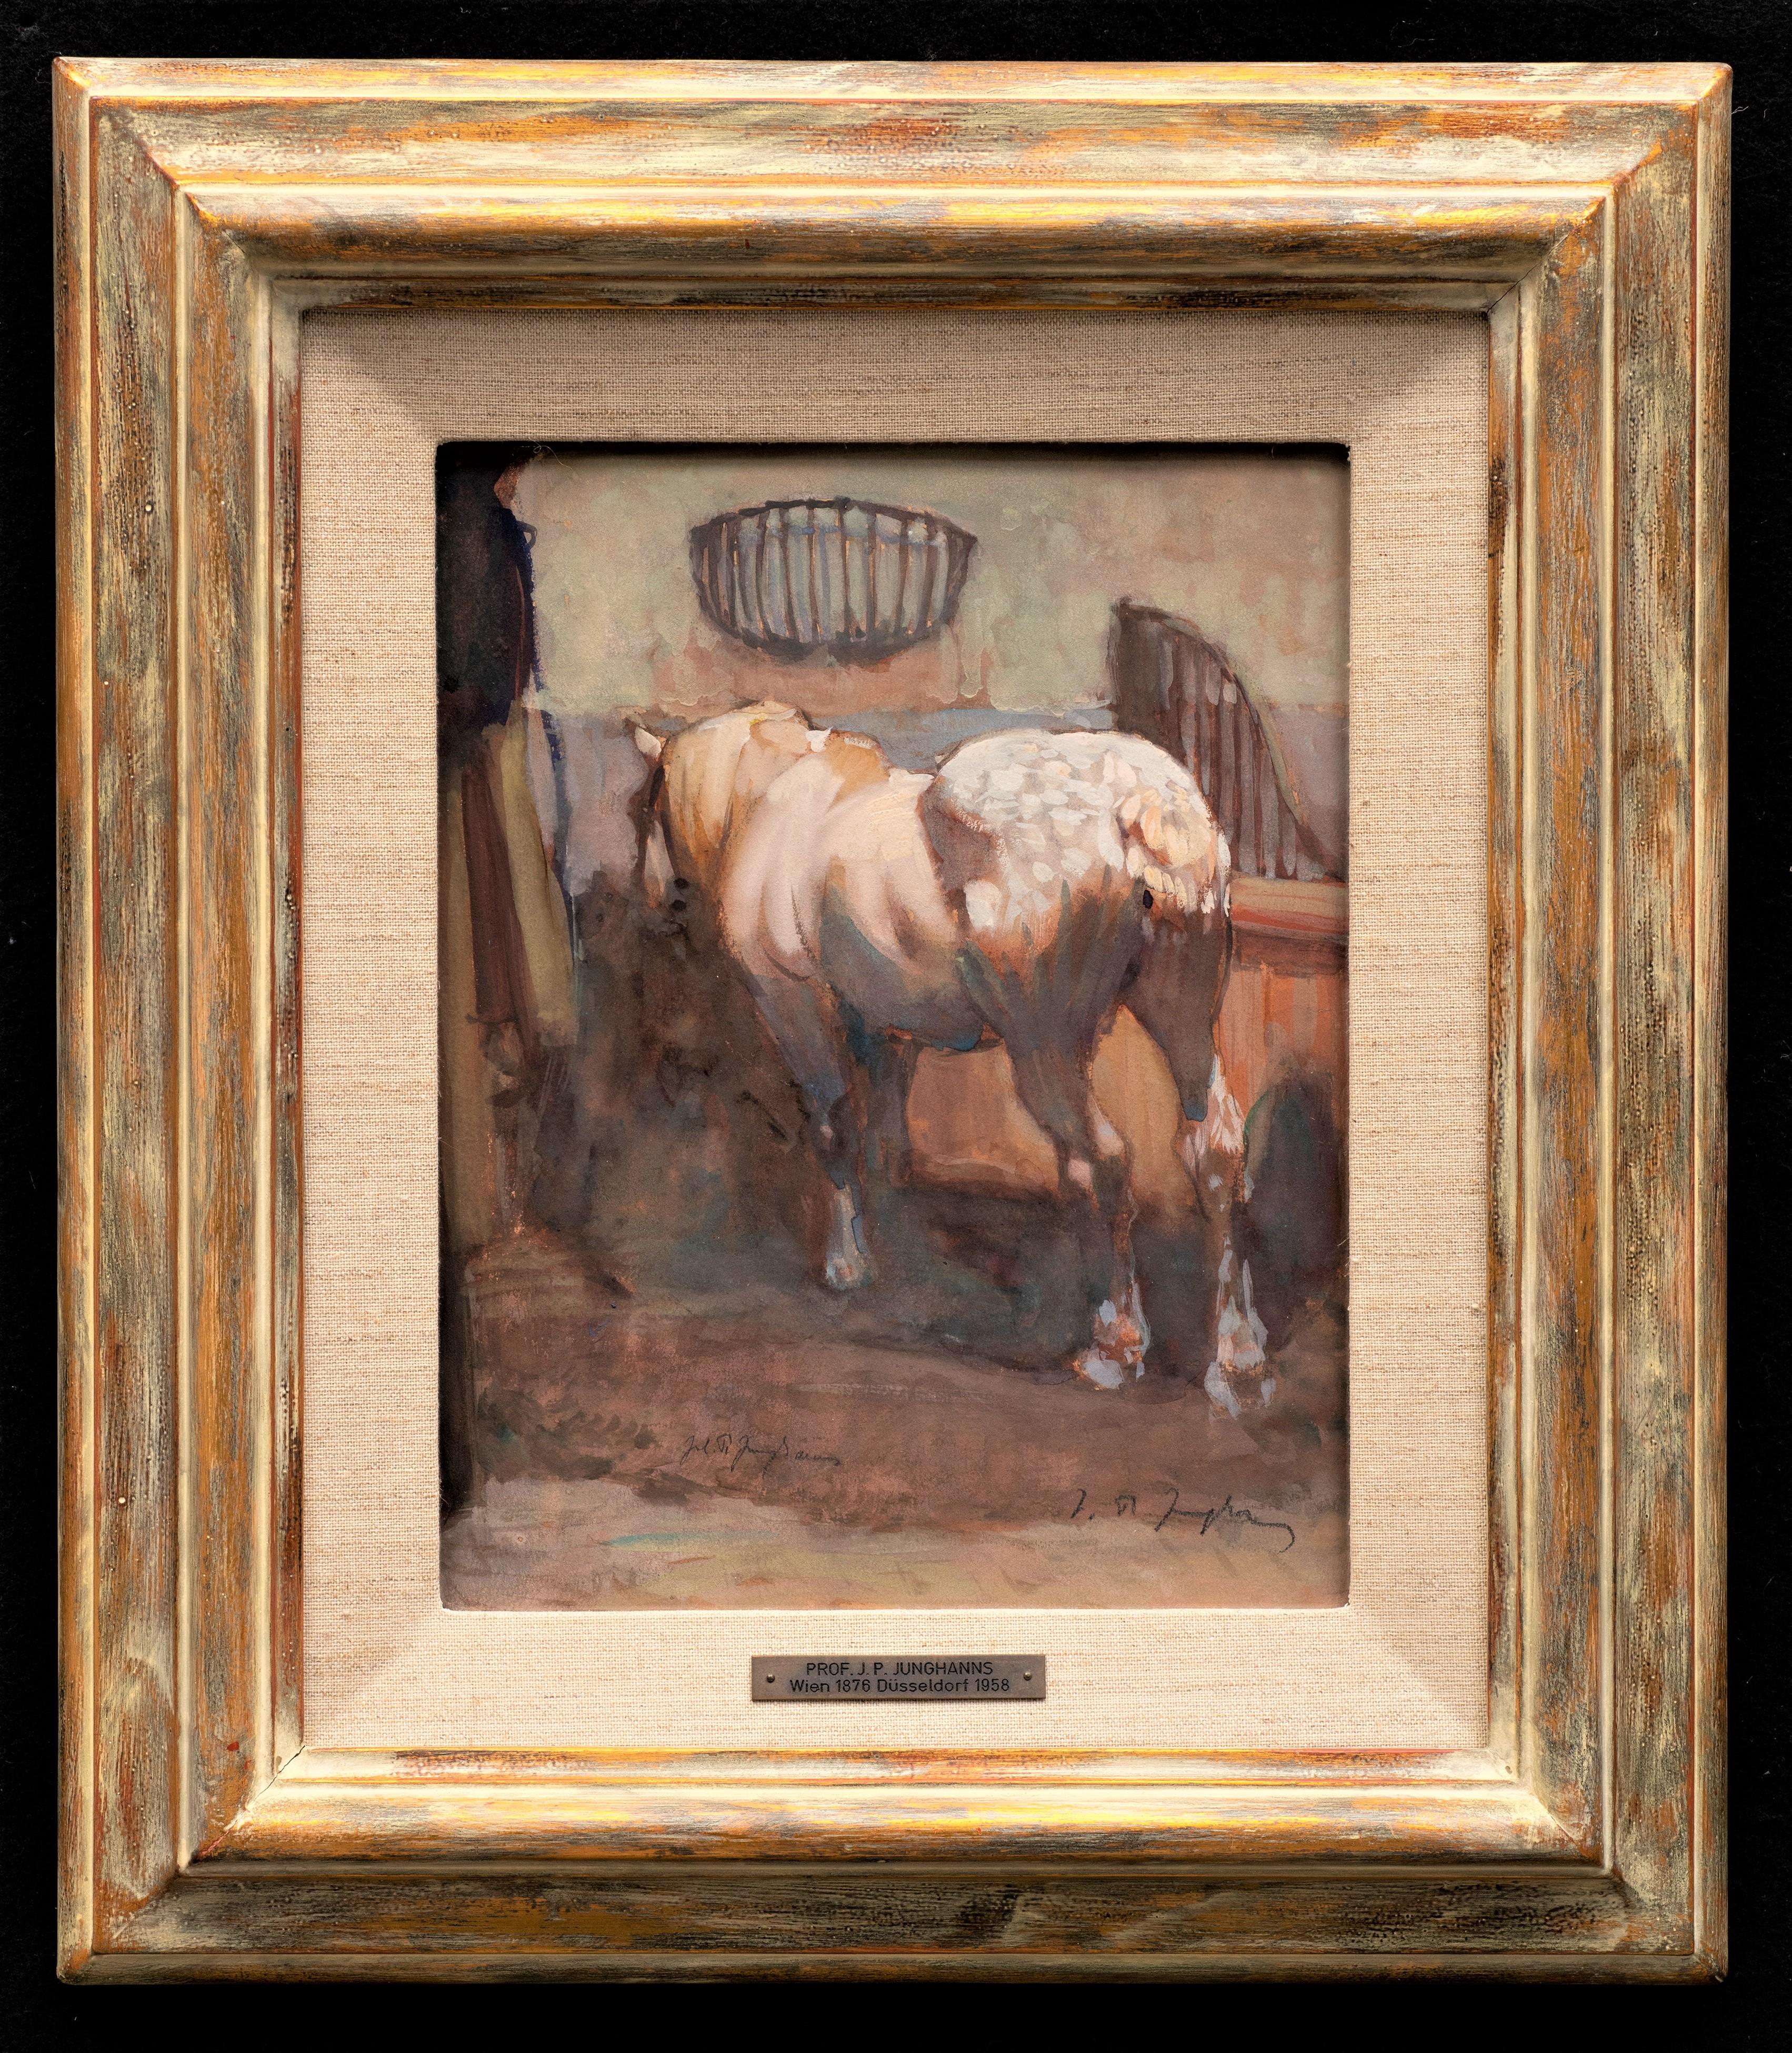 Antique Horse Painting of a "Dapple Horse in its Stall" Julius Paul Junghanns